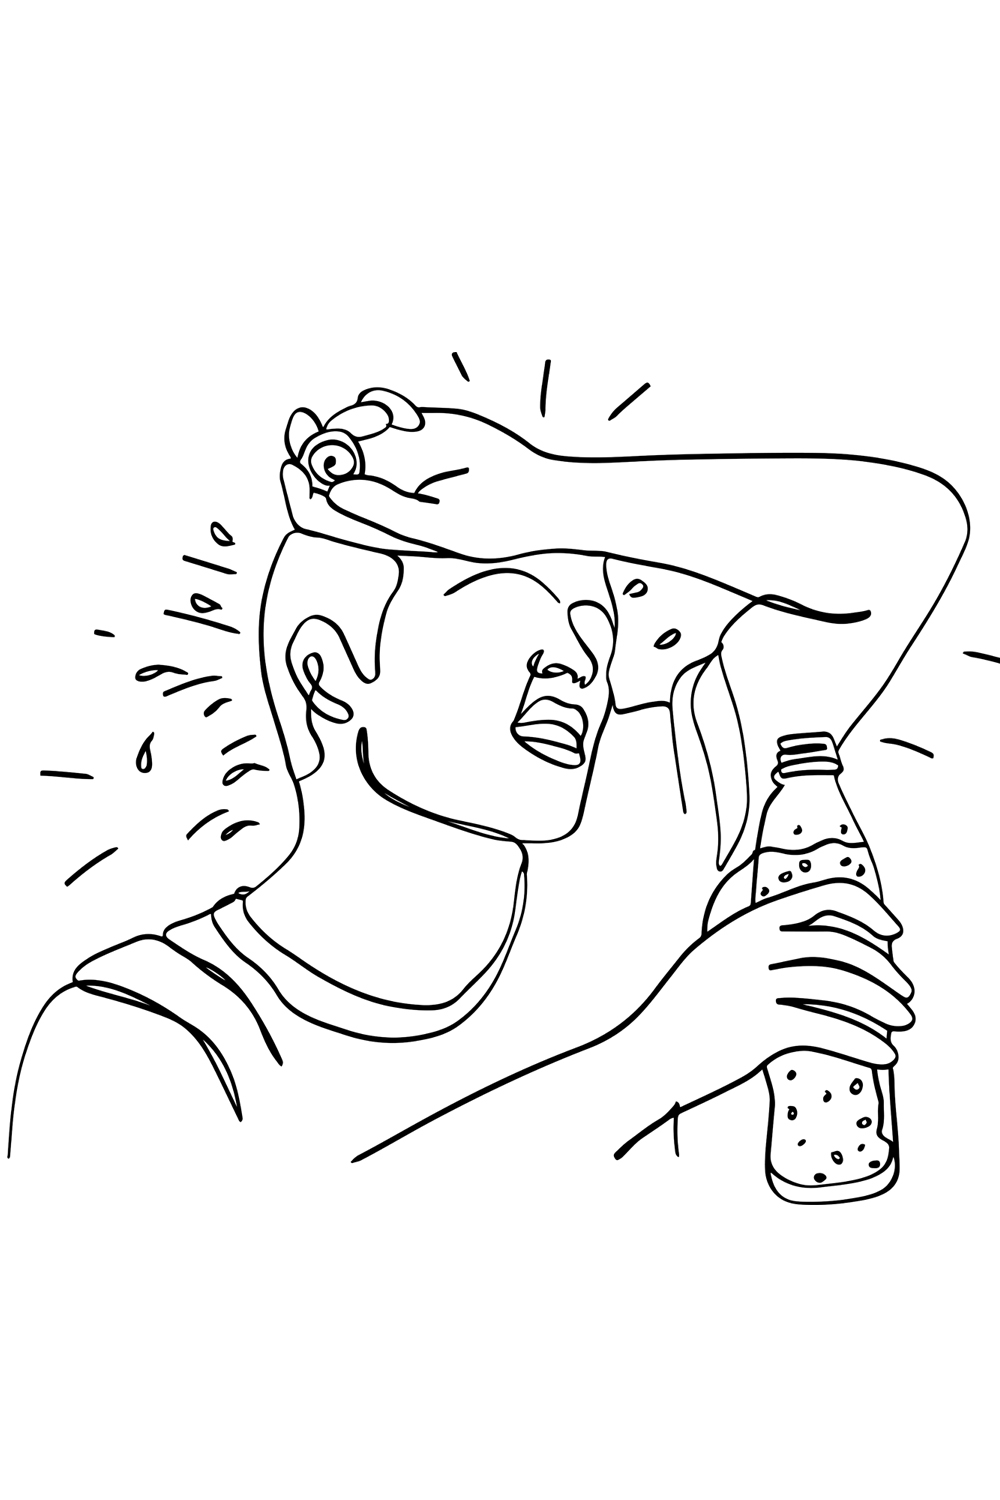 Heat Wave Fatigue: Cartoon Illustration of Exhausted Athlete with Water Bottle, Battling the Heat: Vector Image of Tired Sportsman Seeking Refreshment pinterest preview image.